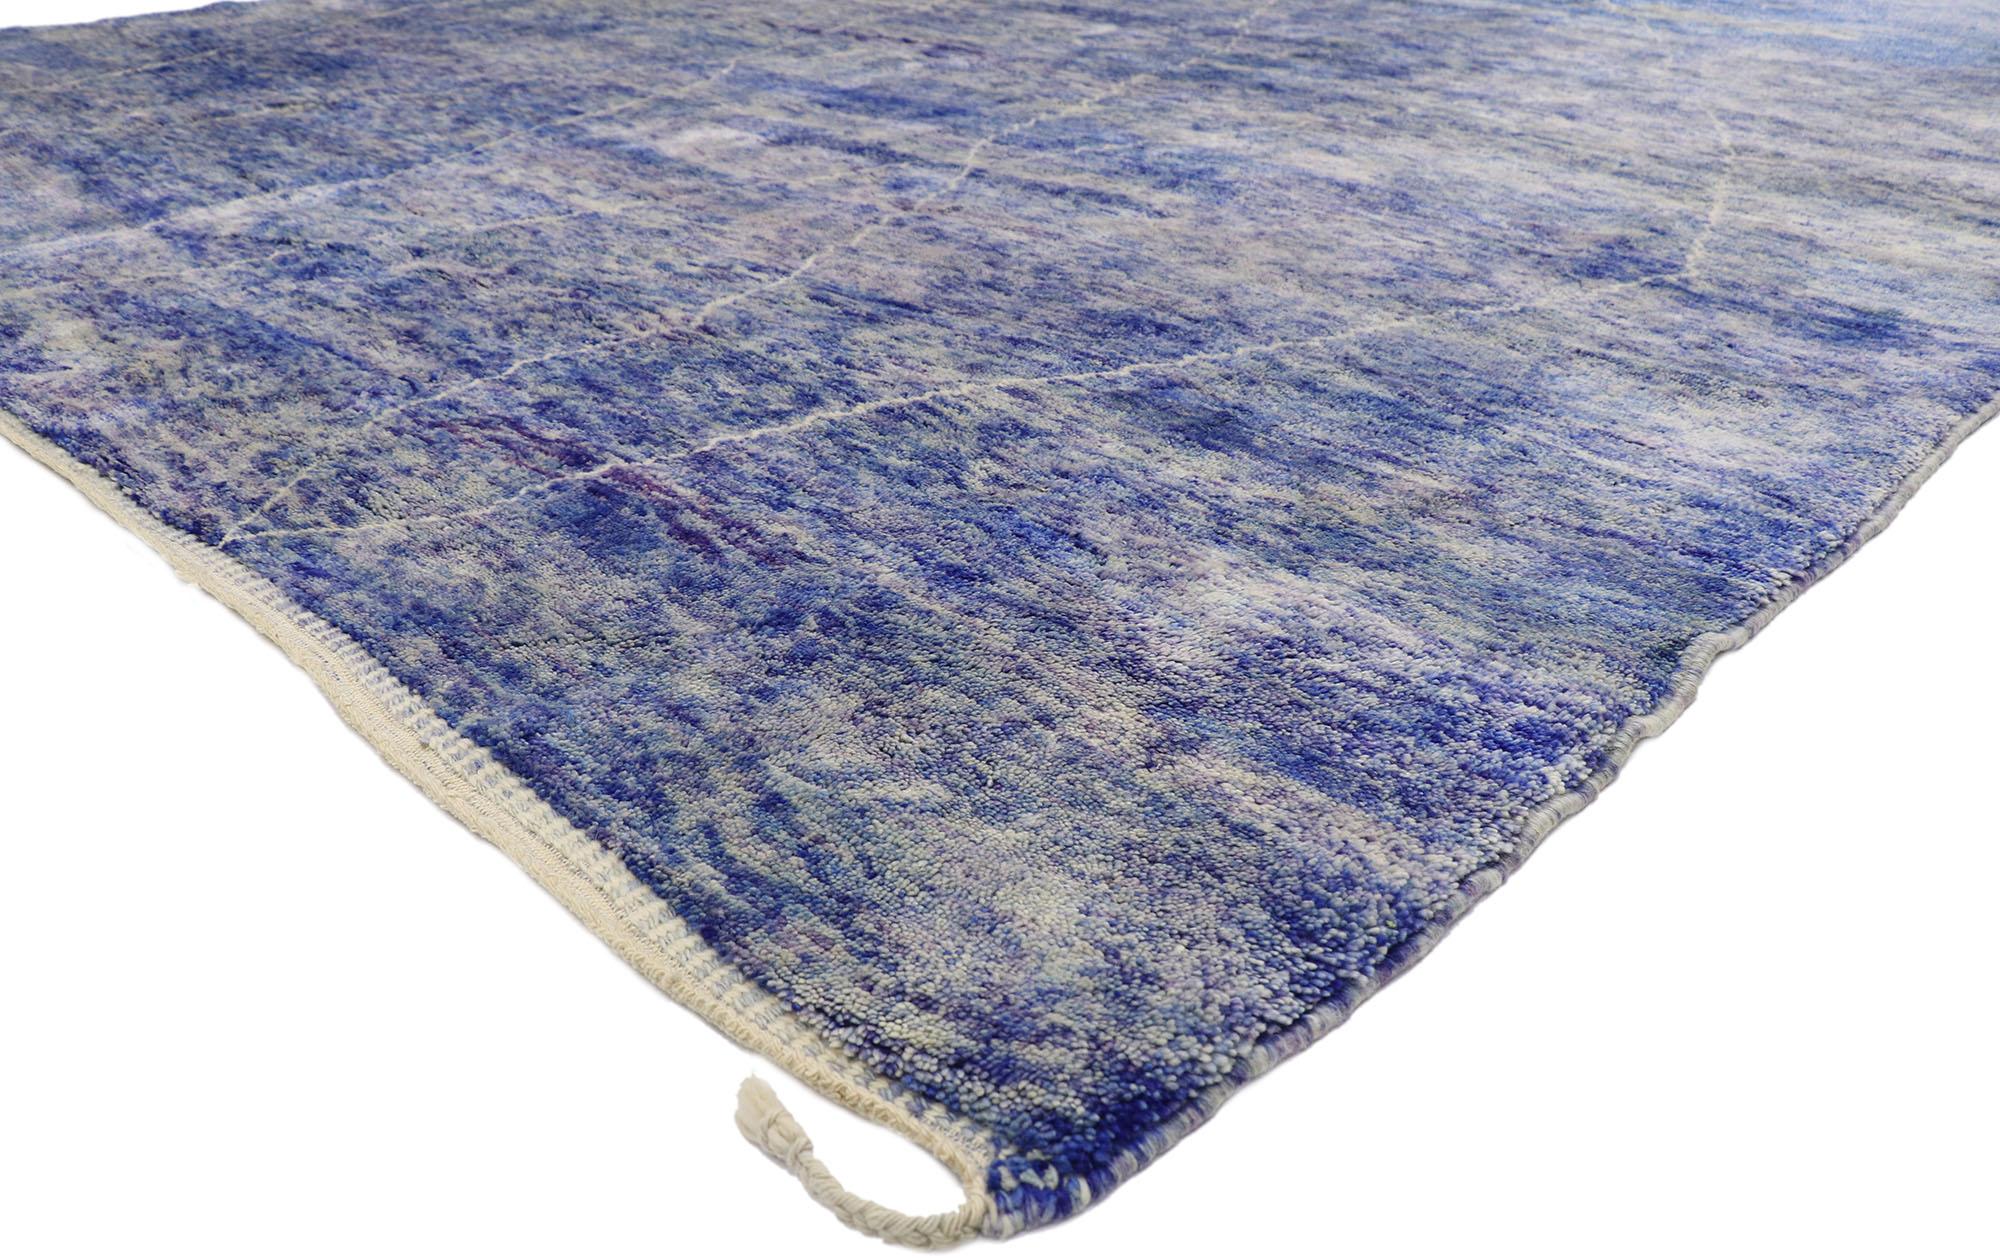 21172, new contemporary Berber Moroccan rug with Bohemian style. With its simplicity, plush pile and Mid-Century Modern Bohemian vibes, this hand knotted wool contemporary Berber Moroccan rug is a captivating vision of woven beauty. The abrashed